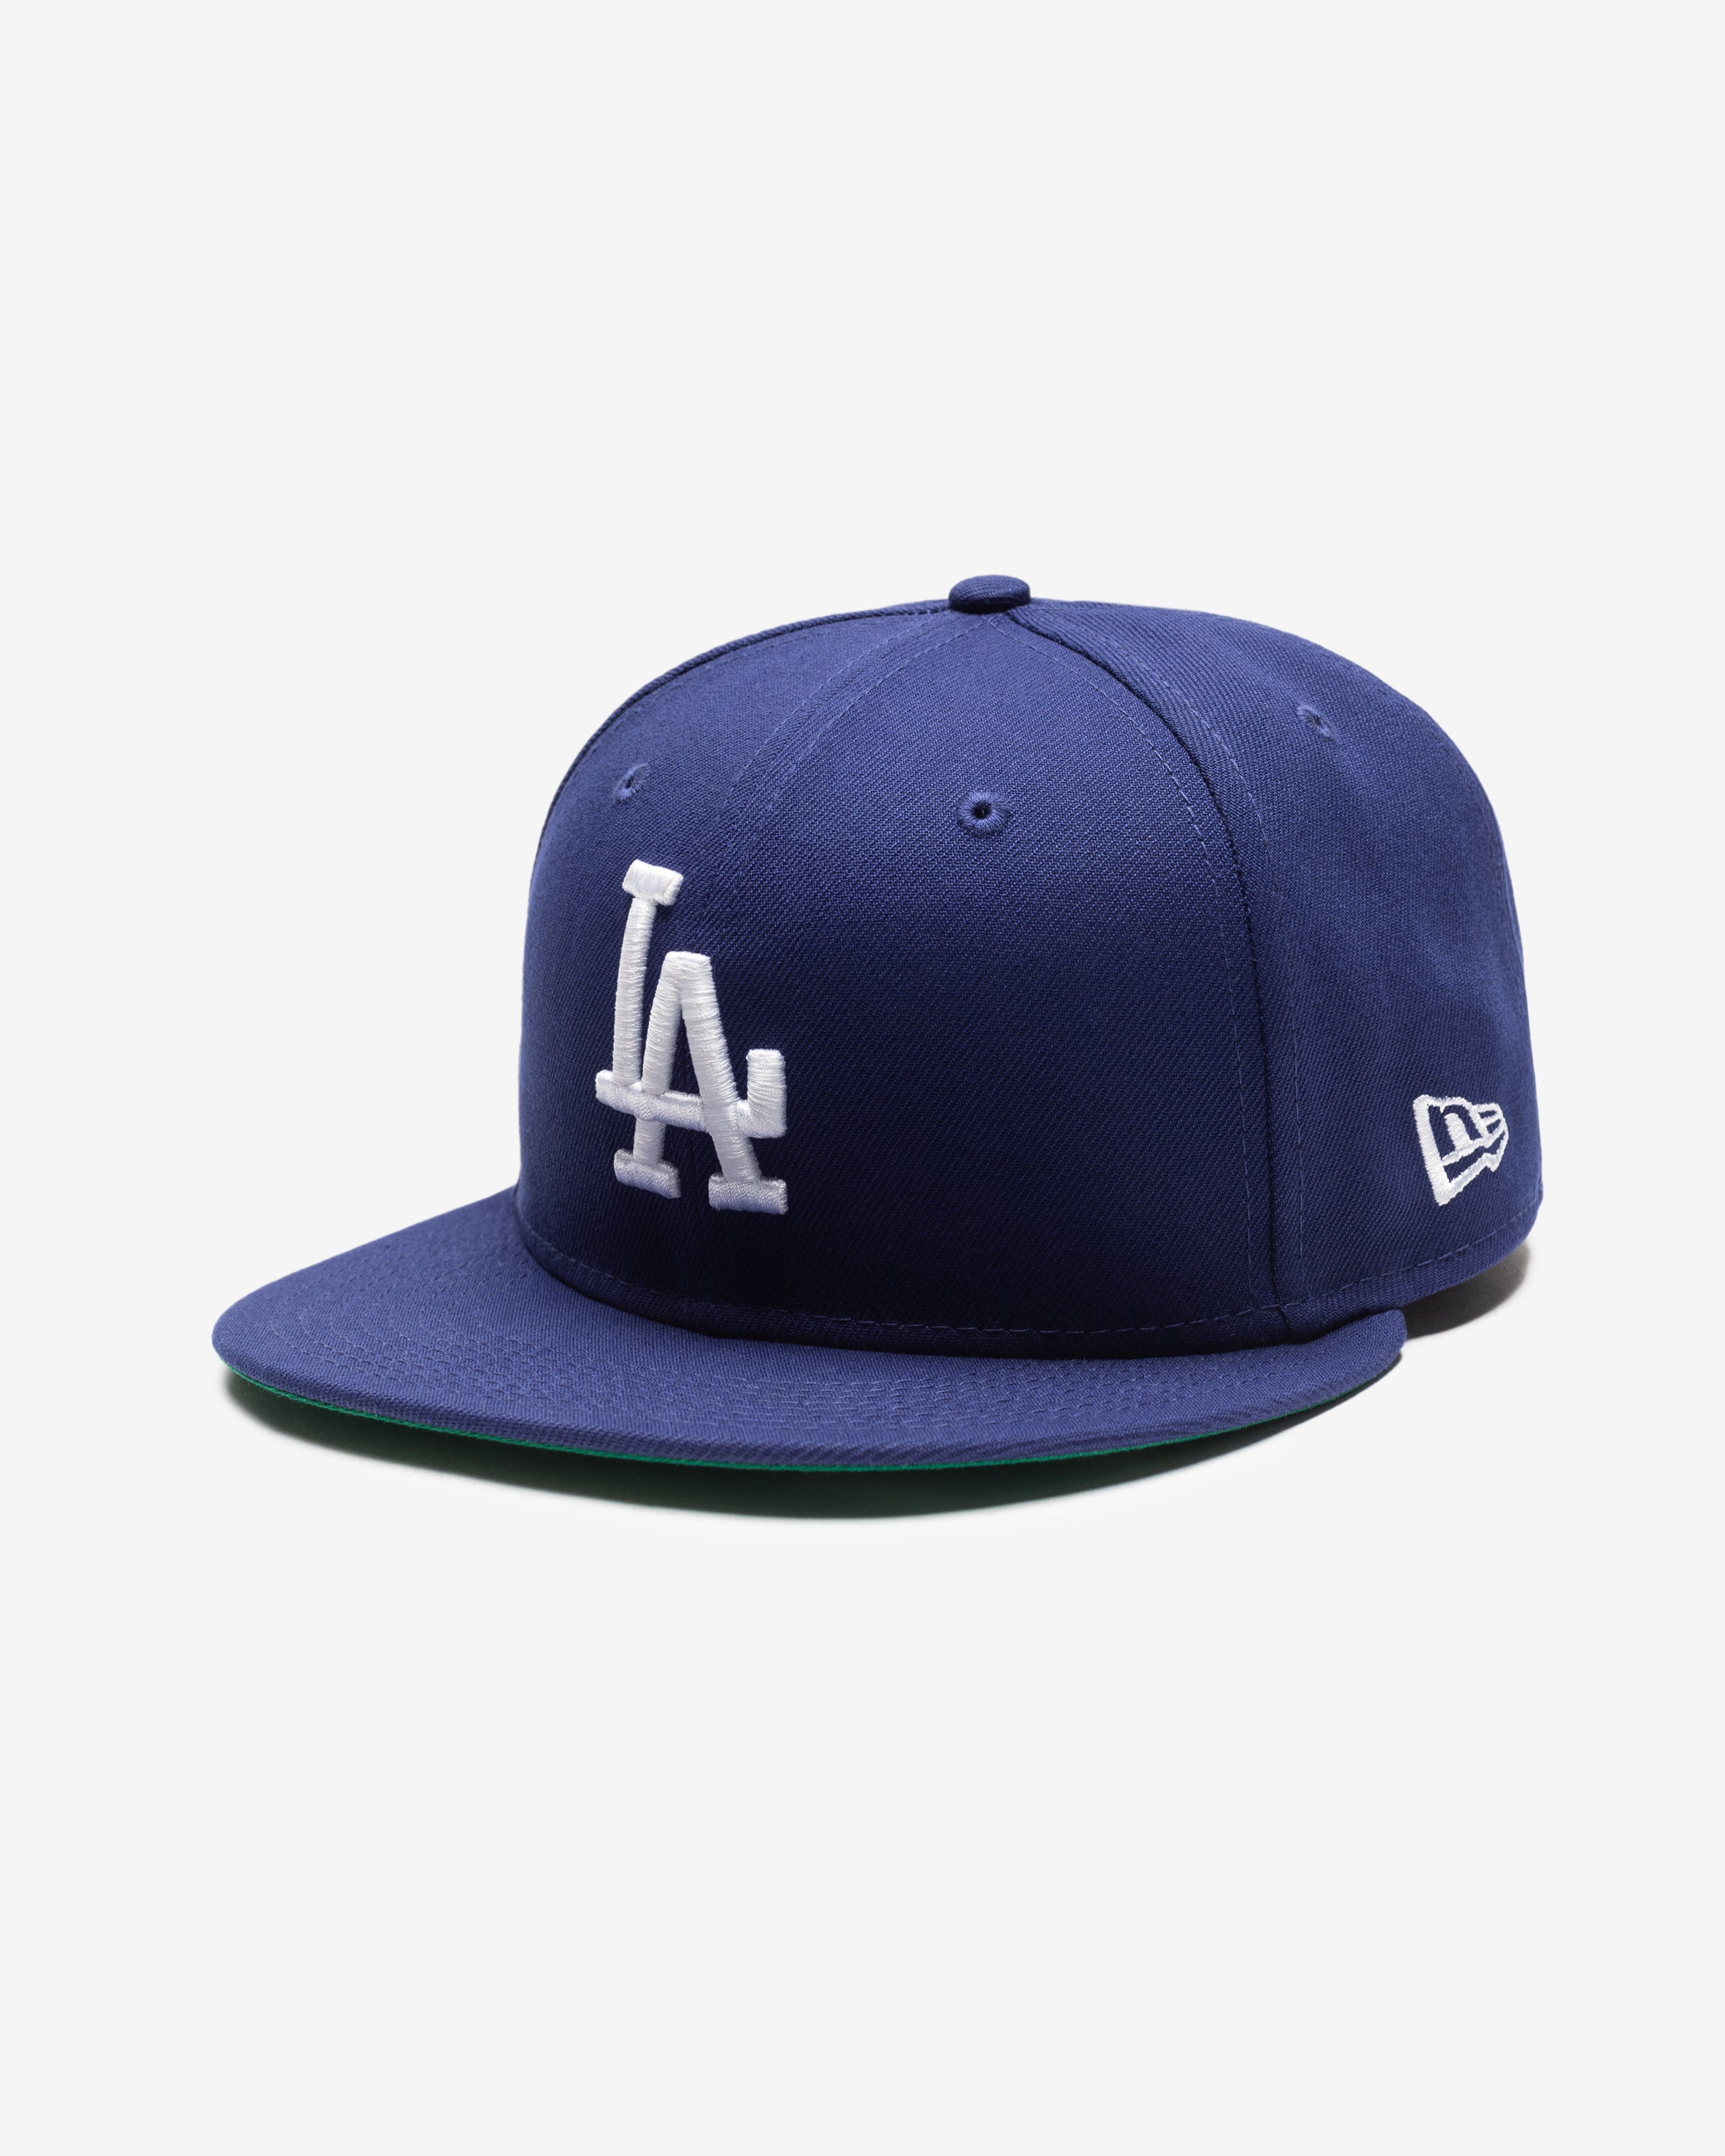 UNDEFEATED X LA DODGERS WORLD CHAMPIONS NEW ERA 59FIFTY FITTED 